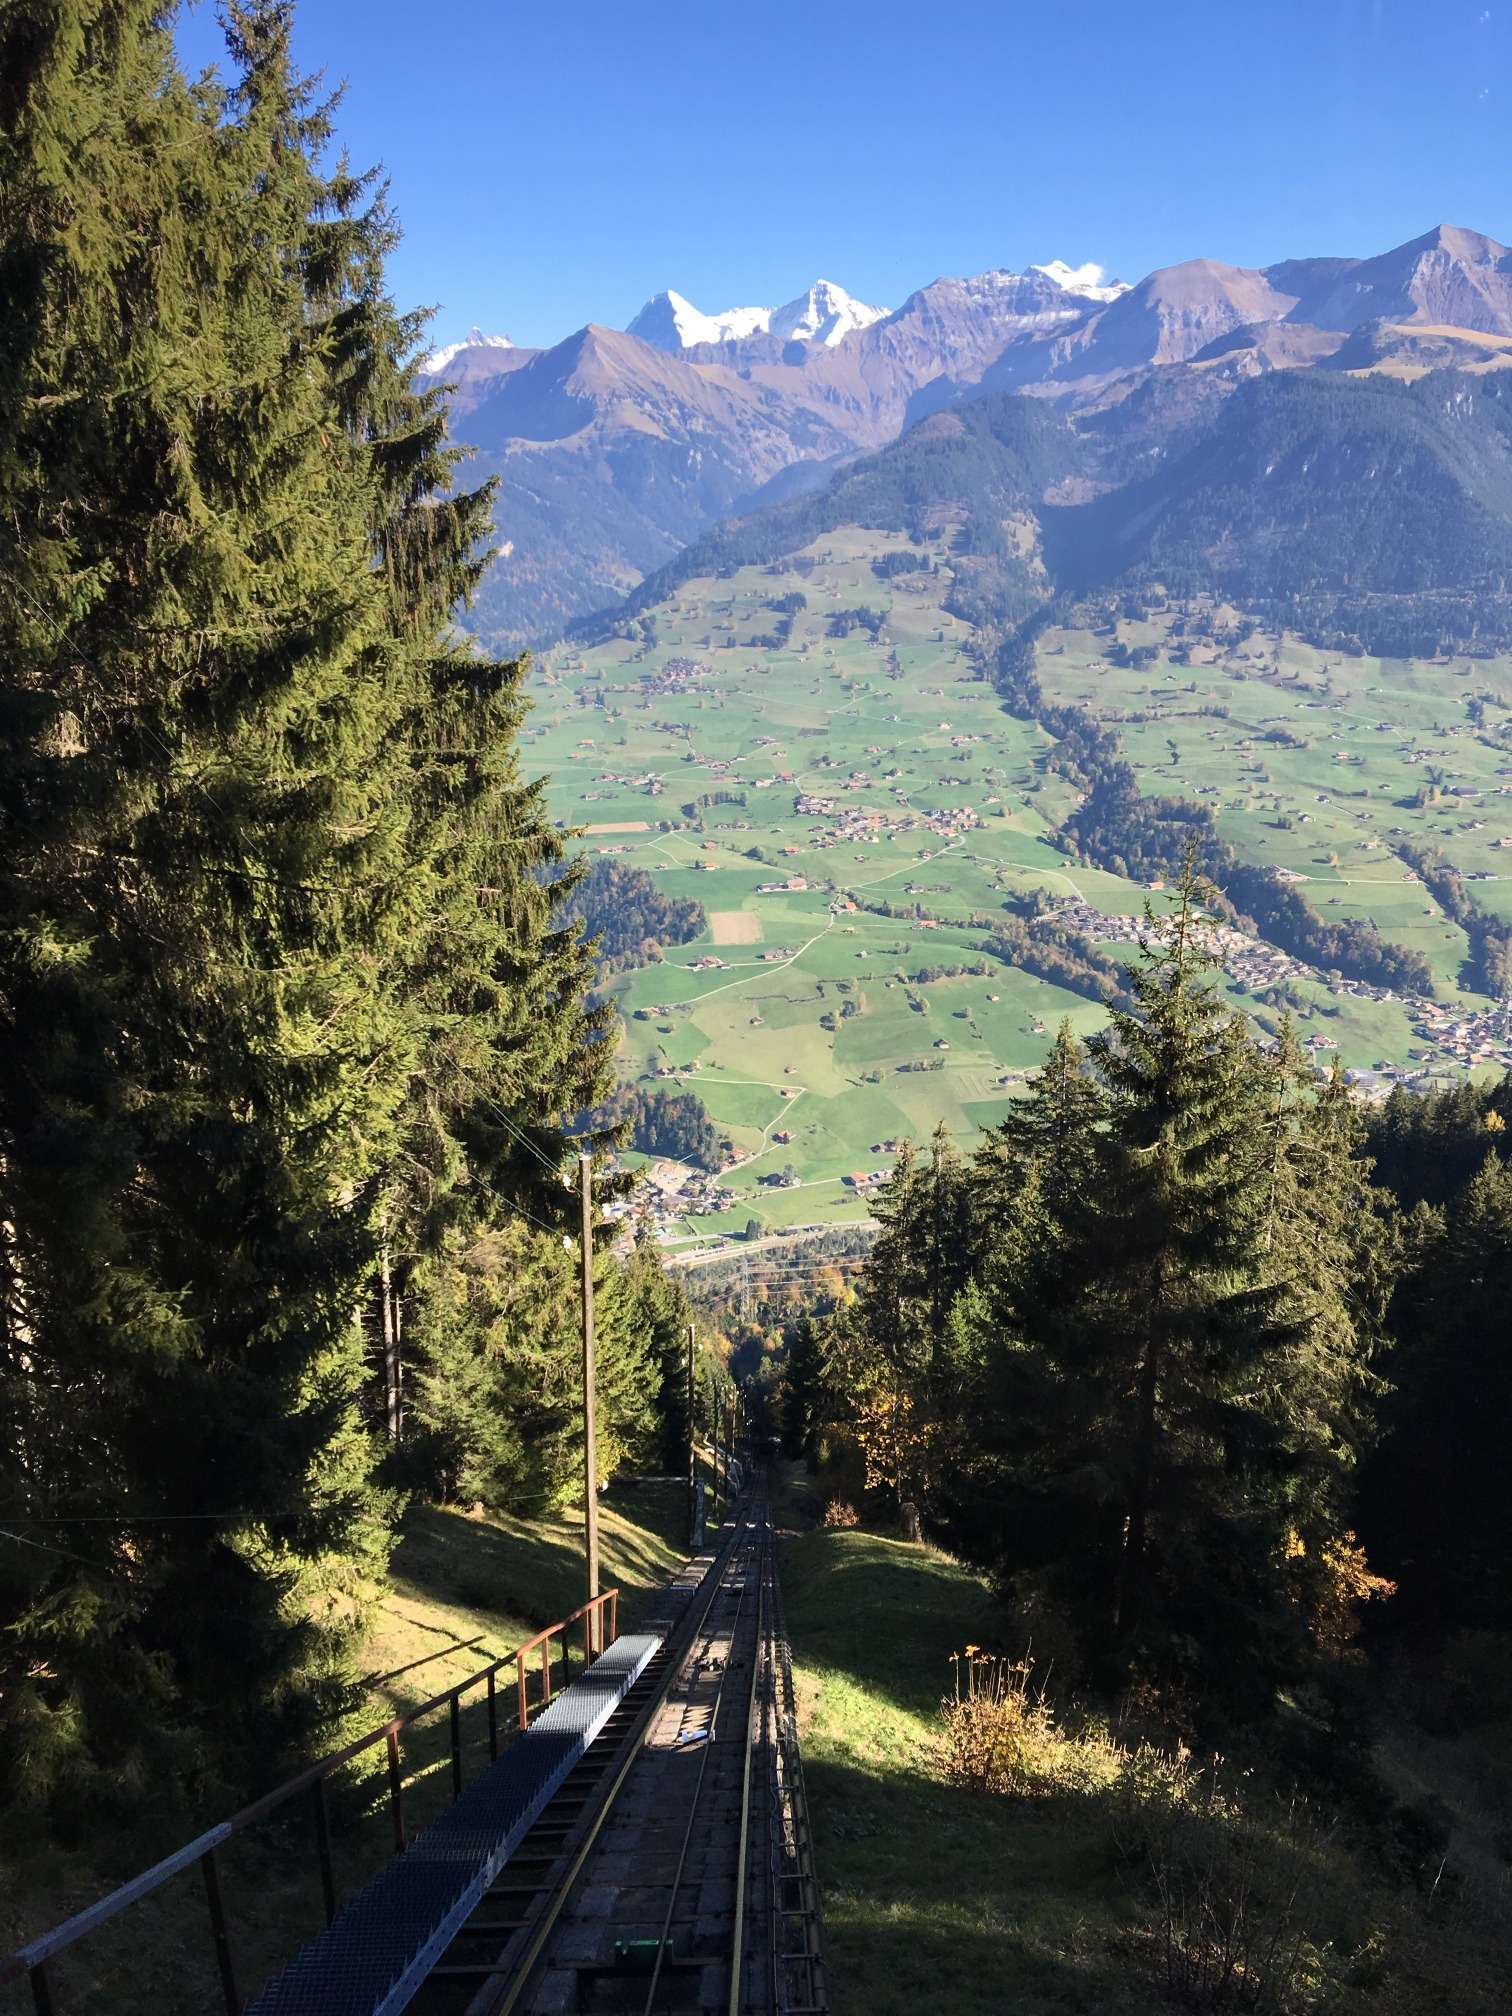 The view from the Nisenbahn